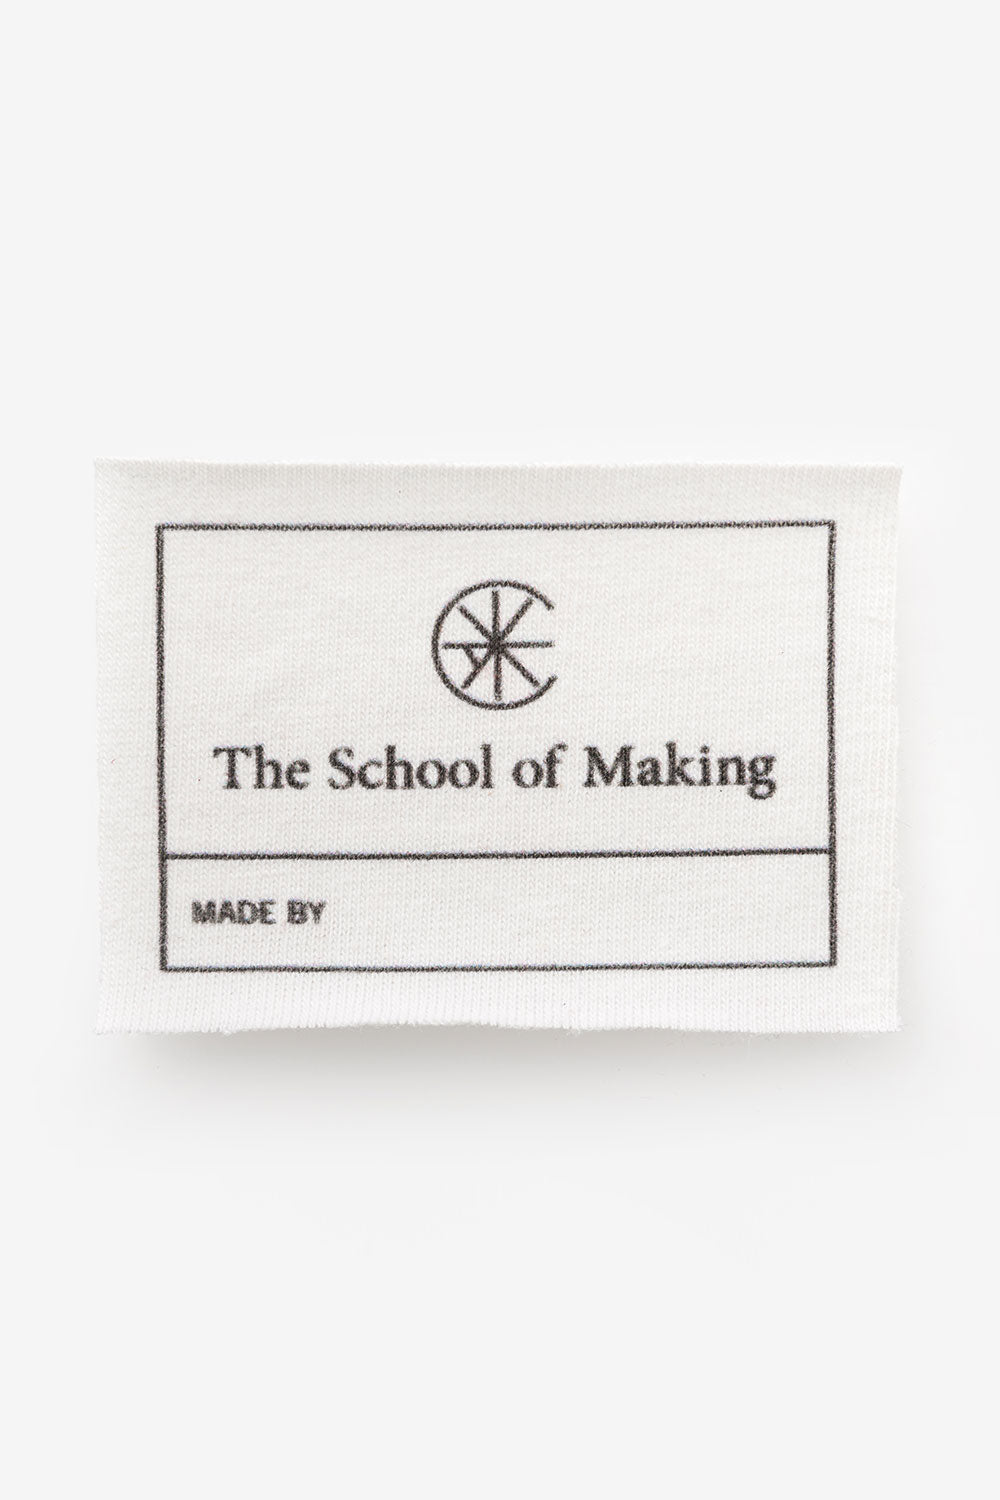 The School of Making TSOM Label for Hand-Sewing and Hand-Embroidery DIY Clothing Projects.